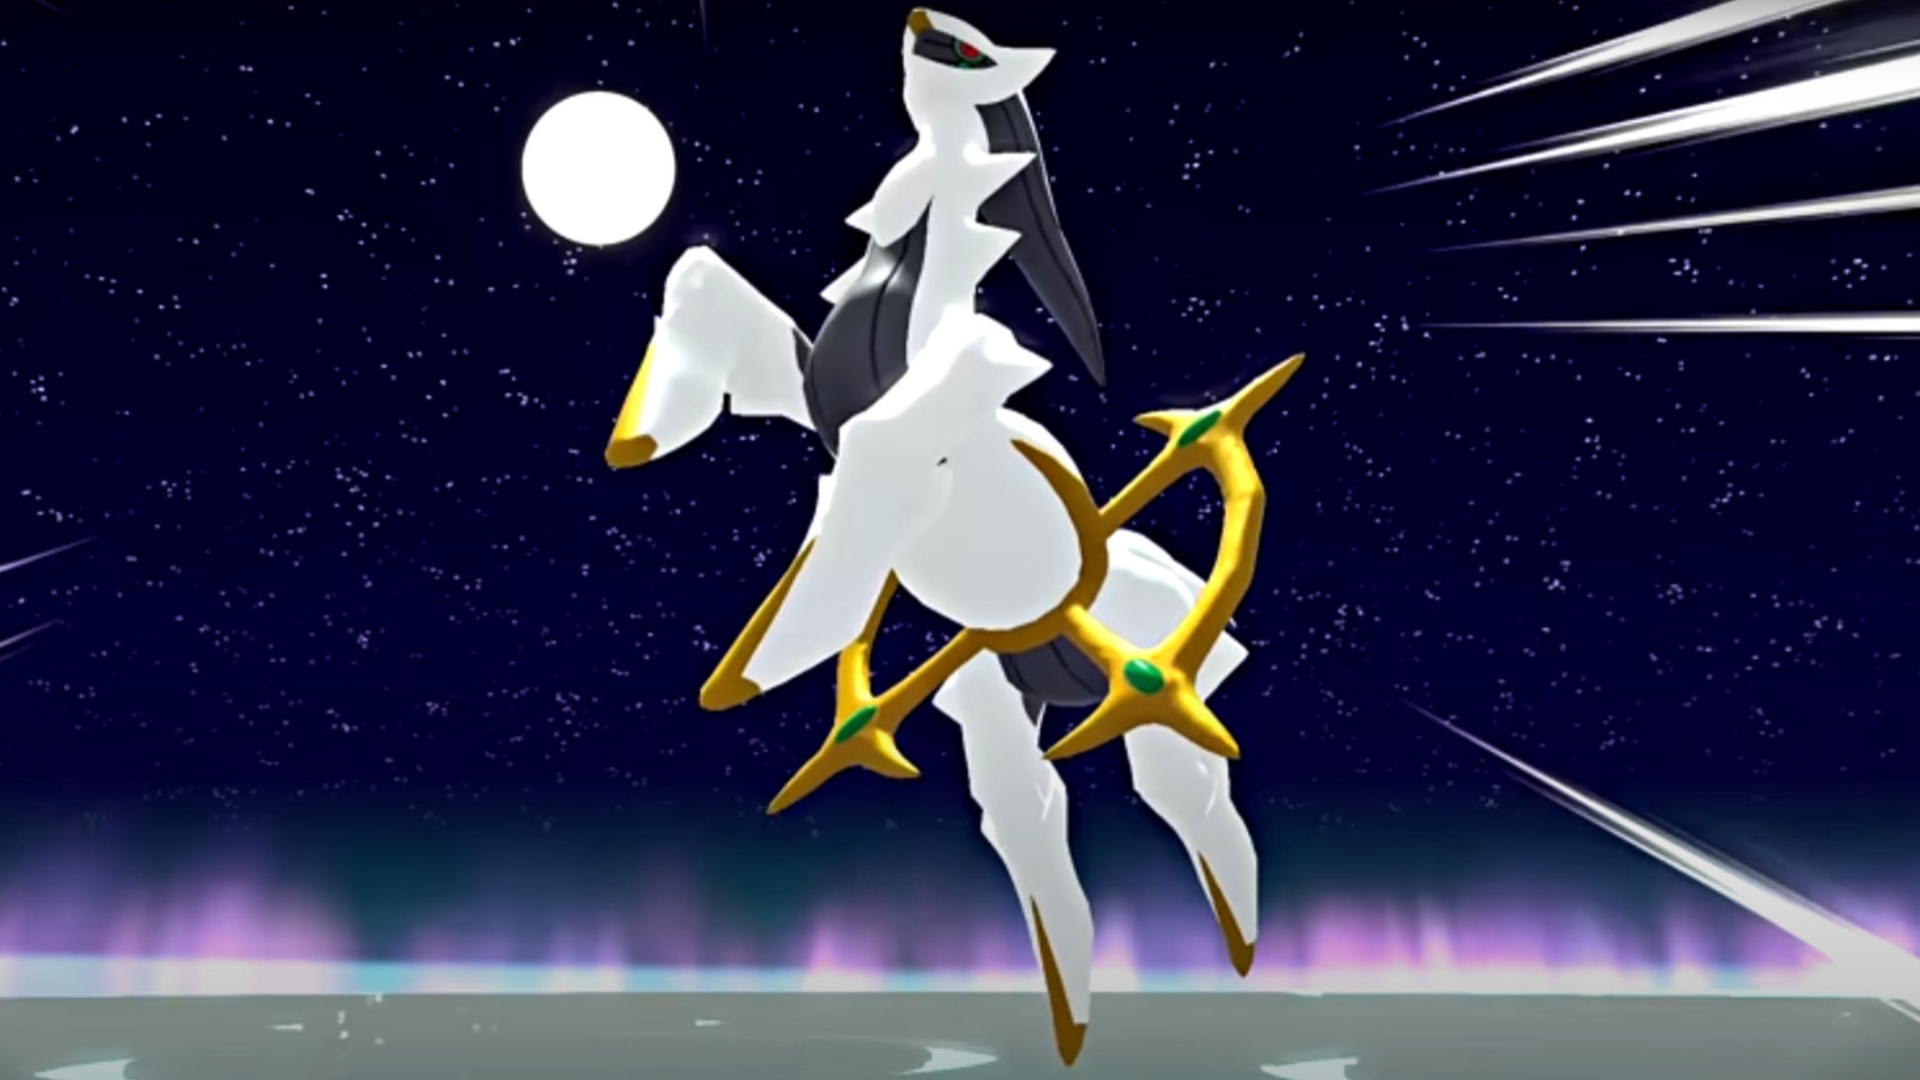 How to get Arceus in Pokémon Brilliant Diamond and Shining Pearl explained